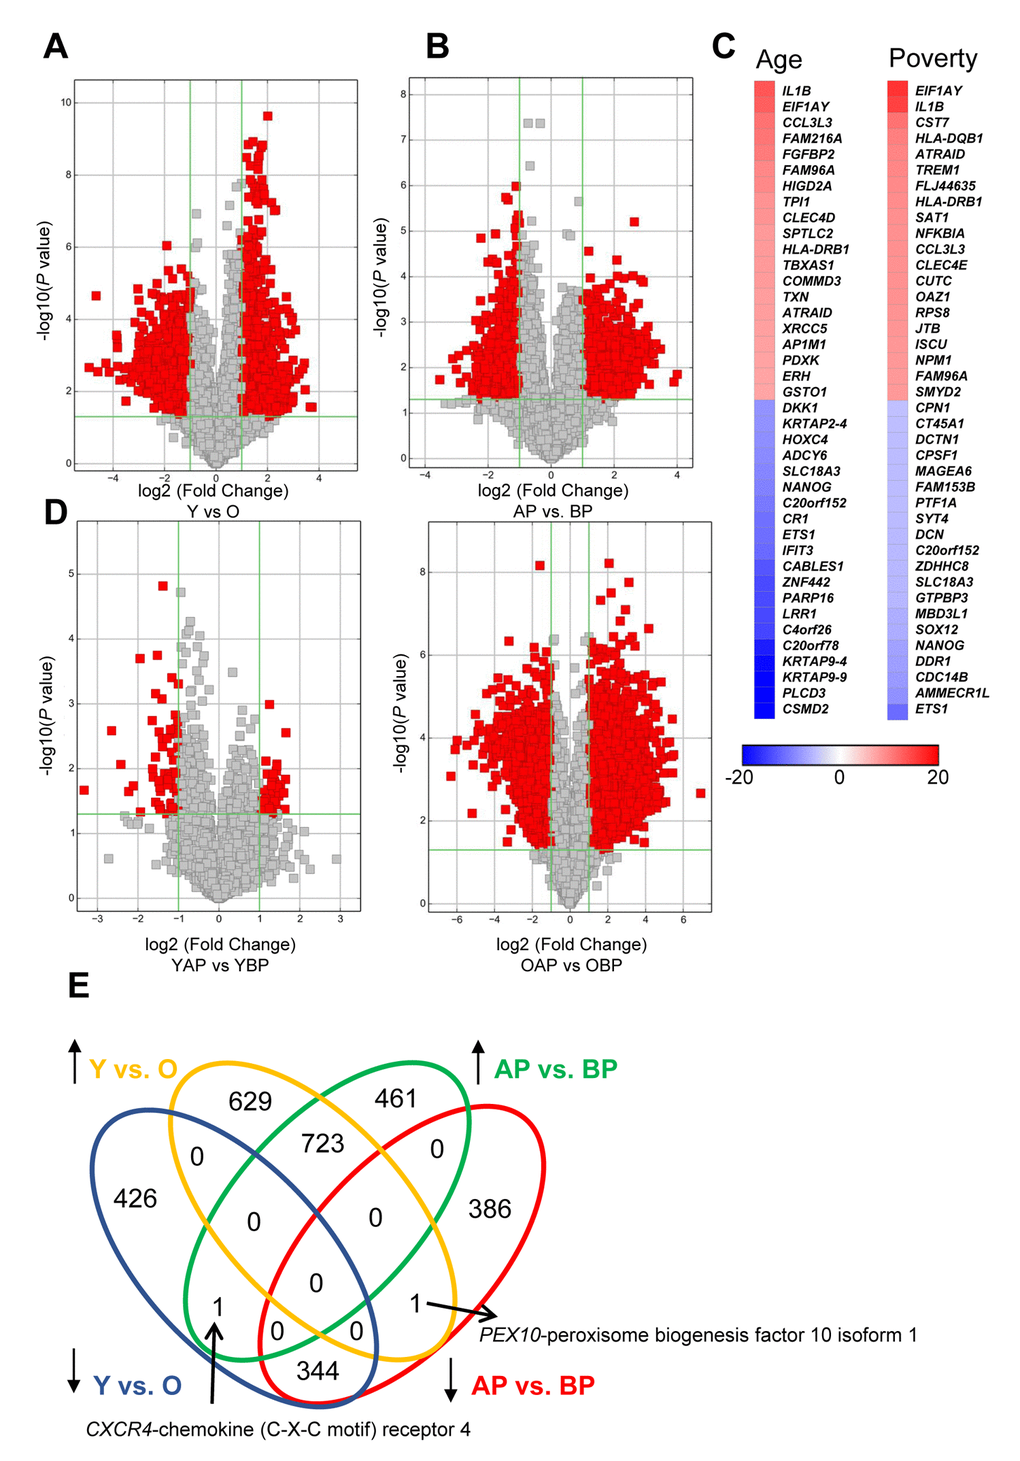 Changes in mRNA expression levels with age and poverty. The levels of expressed mRNAs in white young and old males (A) living above or below poverty (B) were assessed using microarrays. Volcano plots show log2 fold change and P value for each mRNA. Red indicates mRNAs that changed were >2-fold, with P0.05. (A,B,D) Comparisons of significantly different mRNAs between groups are indicated. (C) Heat maps indicate the top fold changed mRNAs with age and poverty. These mRNAs are also listed in Tables 4 and 5. (E) Venn diagram of the total number of significantly increased or decreased mRNAs for each comparison. Y, young; O, old, AP, above poverty; BP, below poverty